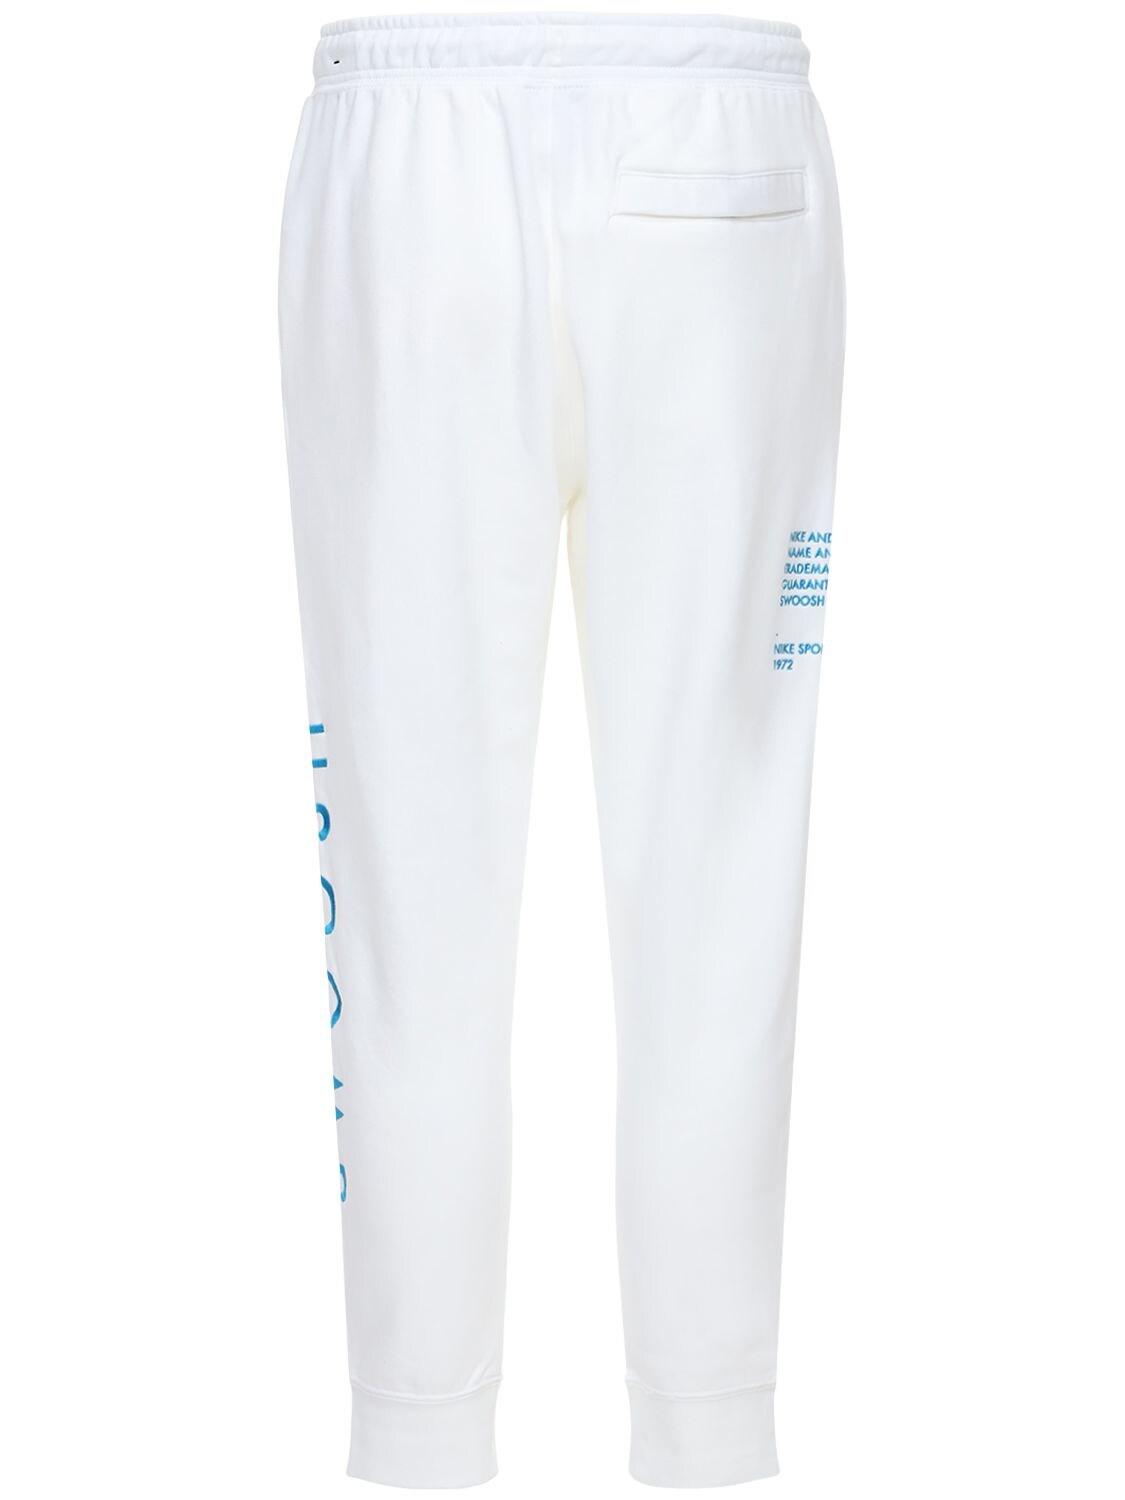 Nike Cotton Jersey Sweatpants in White for Men - Save 26% - Lyst